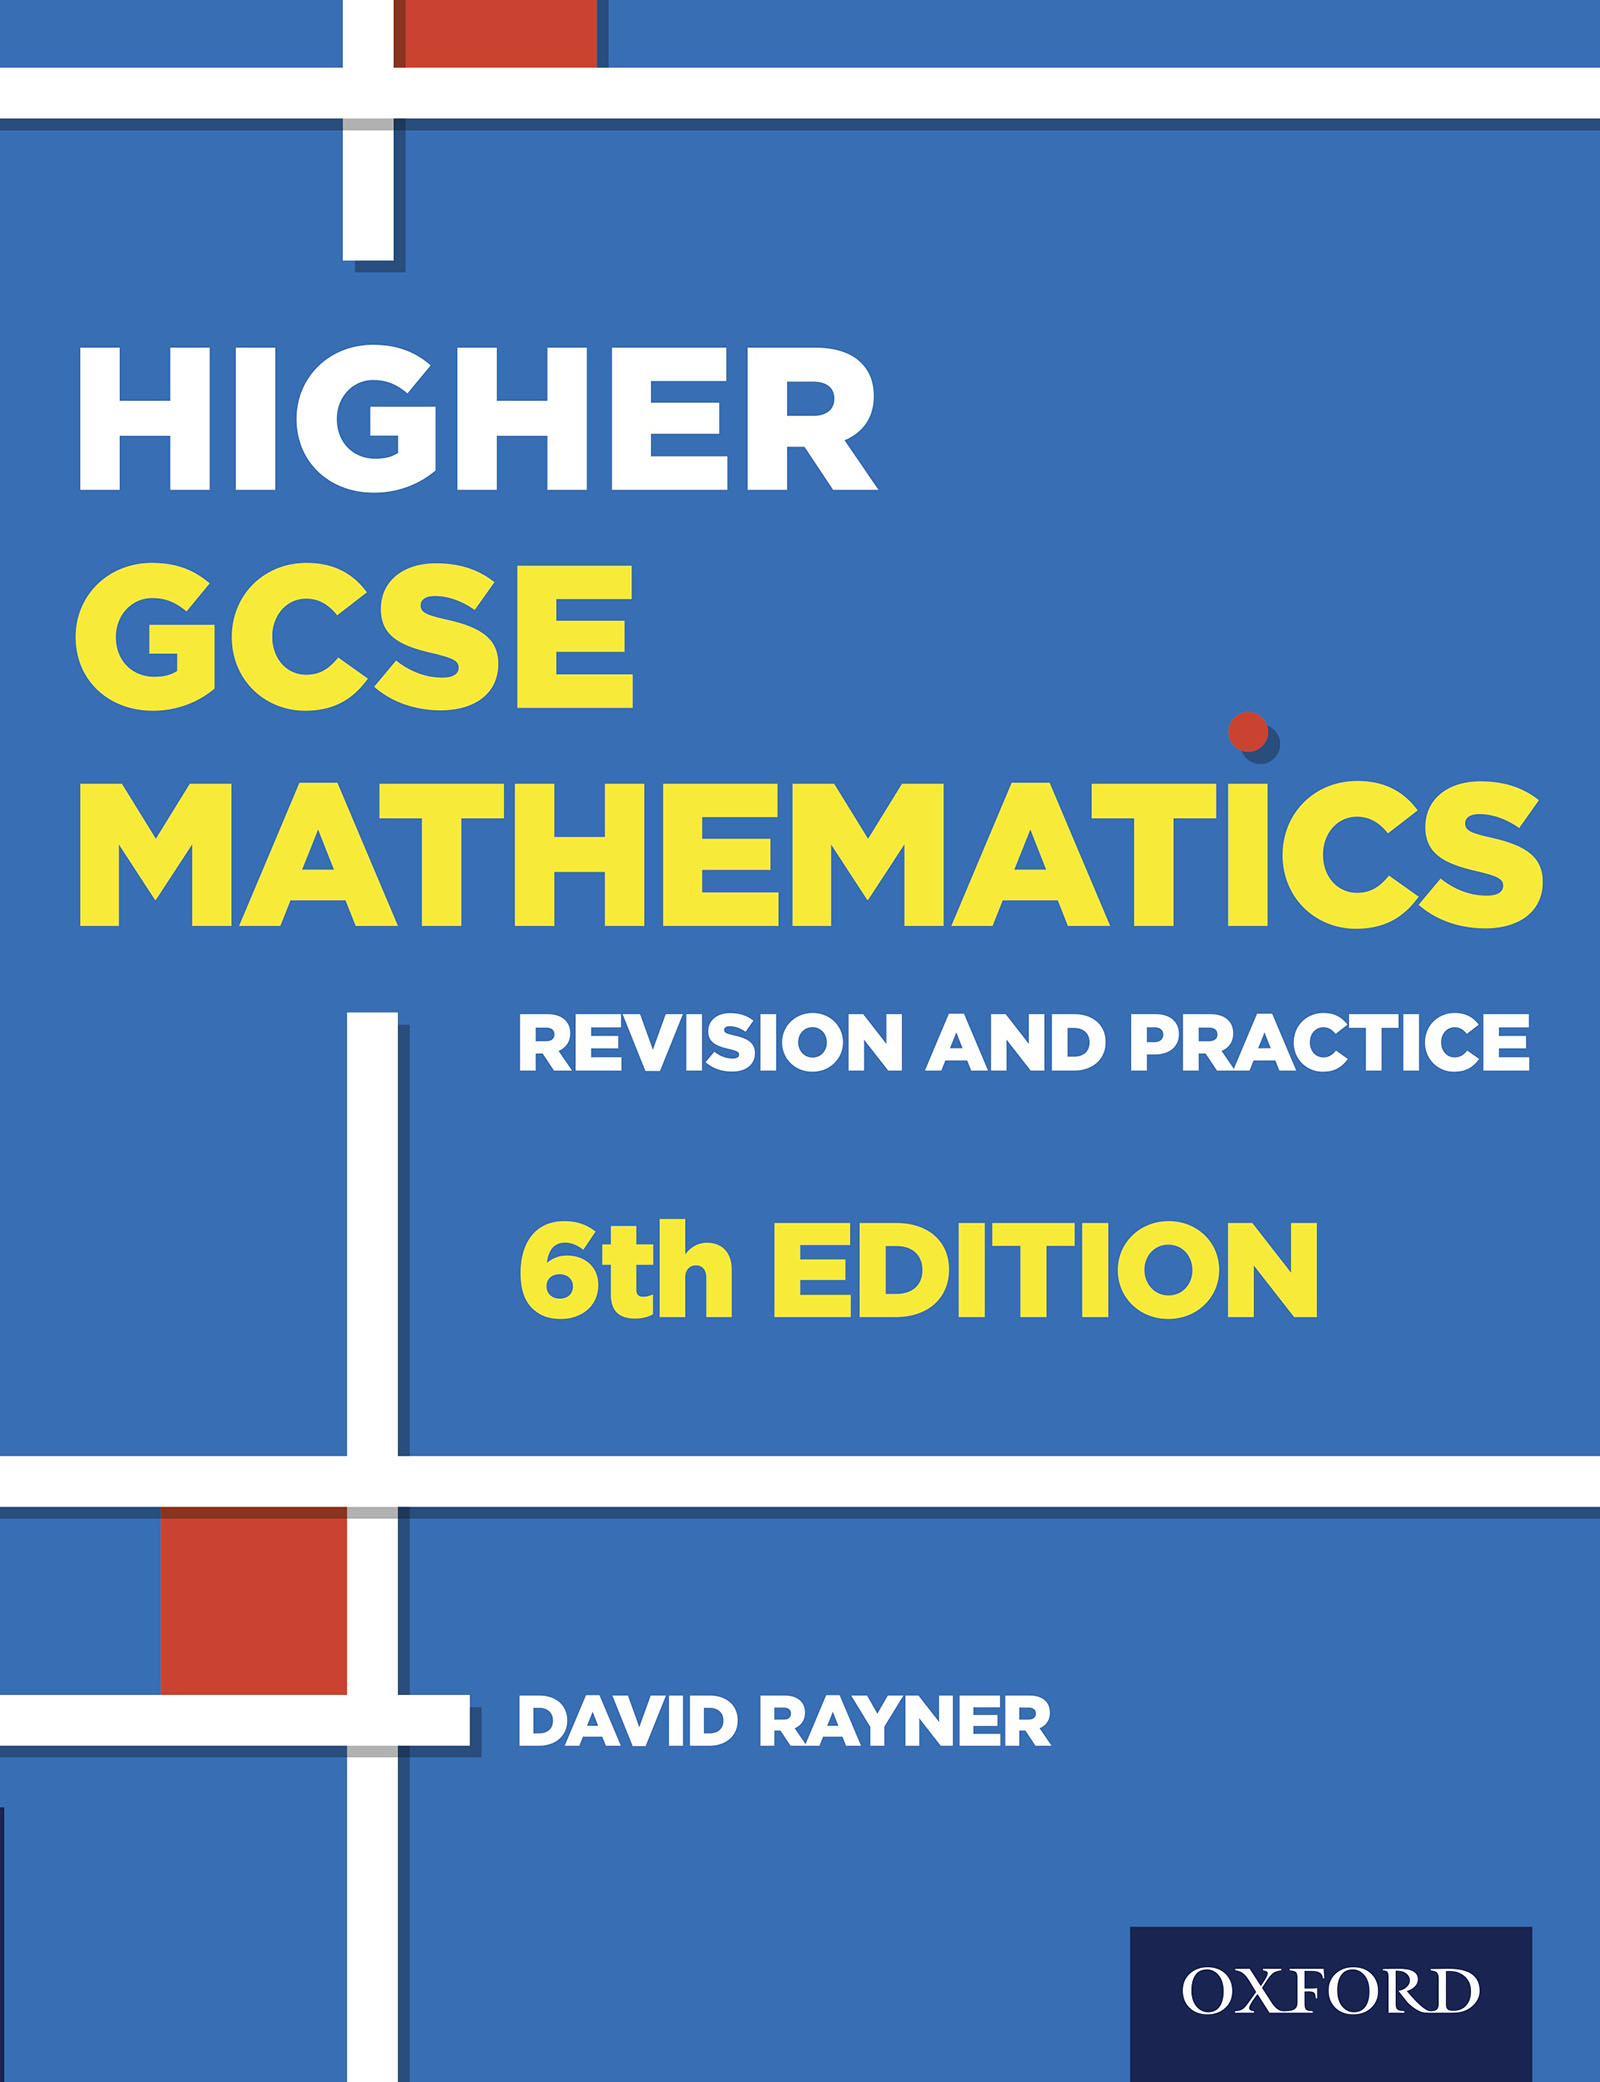 Higher GCSE Mathematics Revision and Practice